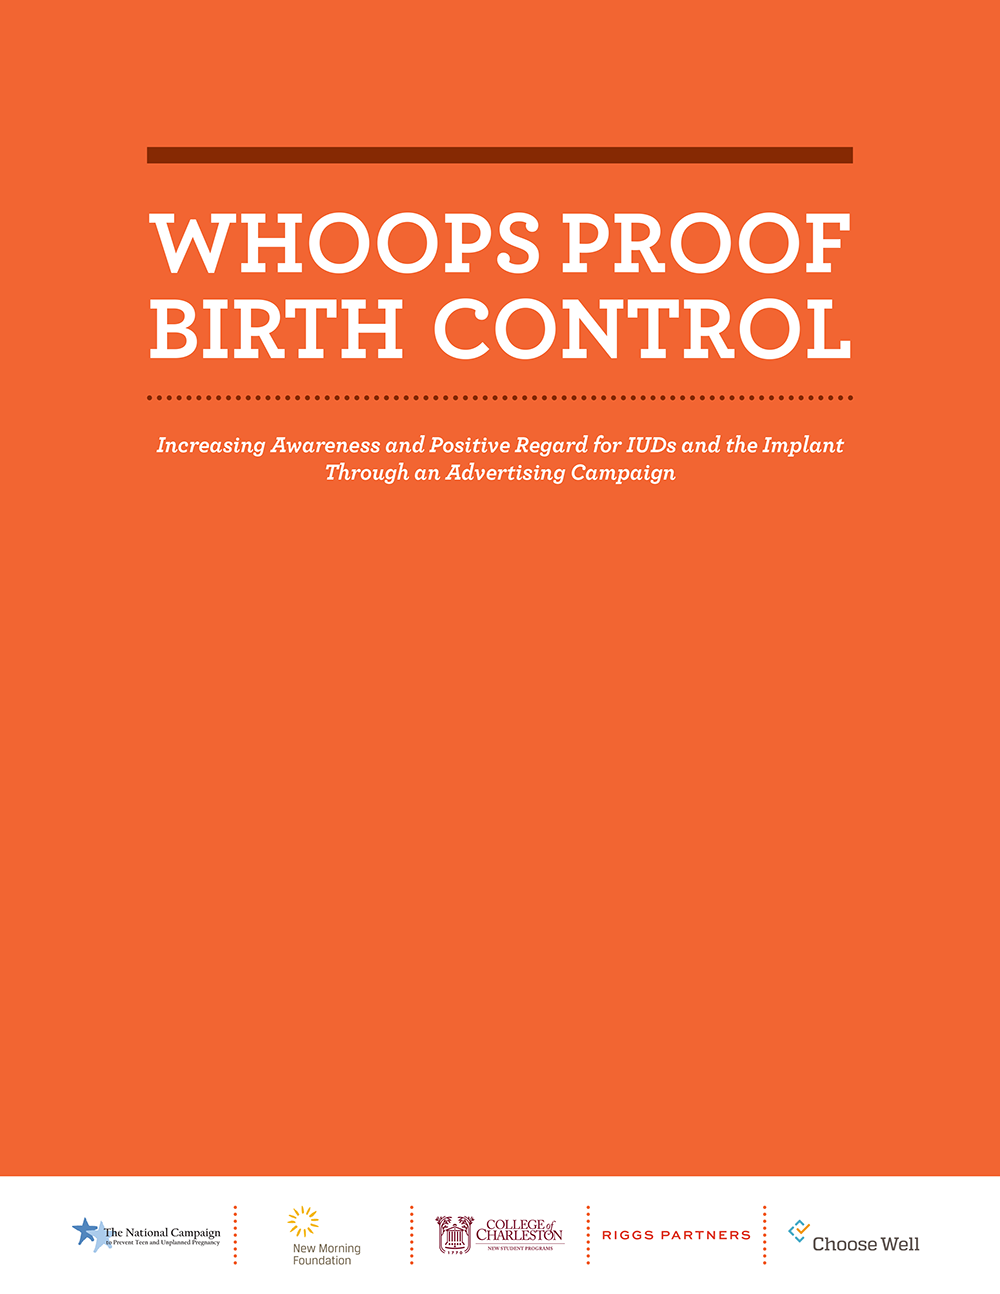 Whoops Proof Birth Control: Increasing Awareness and Positive Regard for IUDs and the implant Through an Advertising Campaign